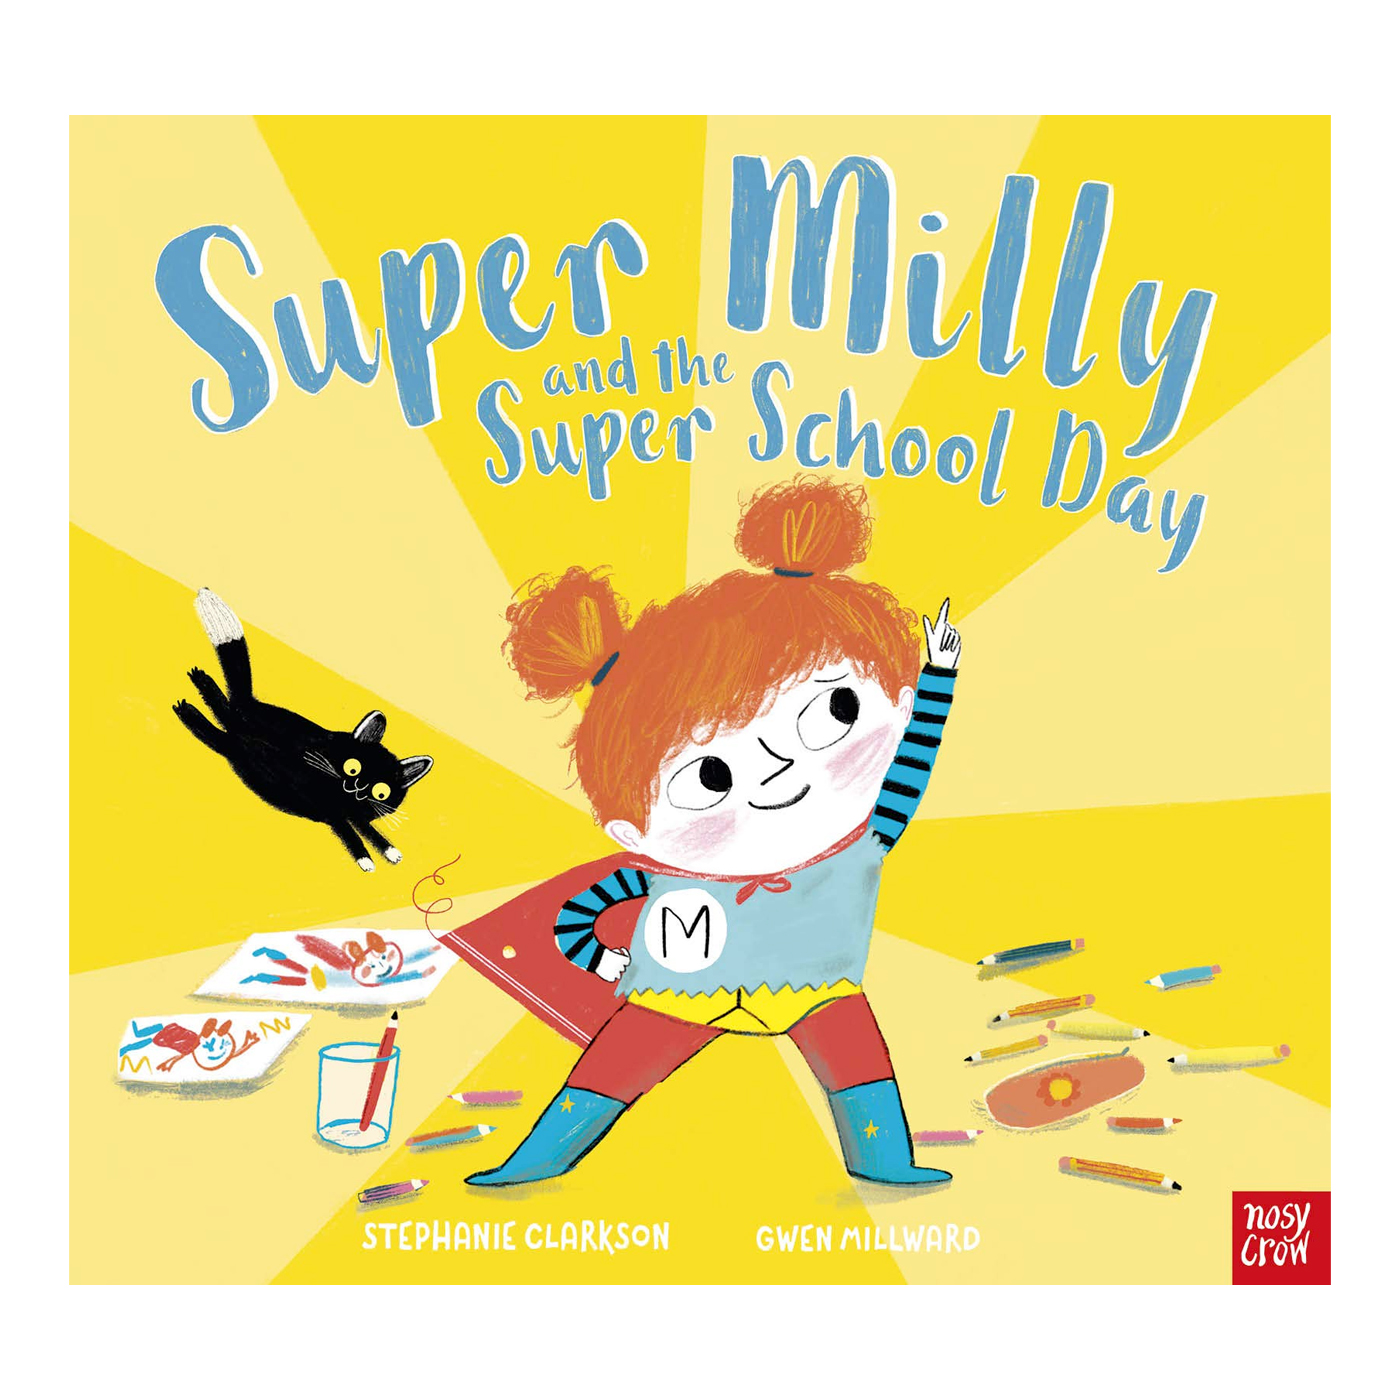  Super Milly and the Super School Day